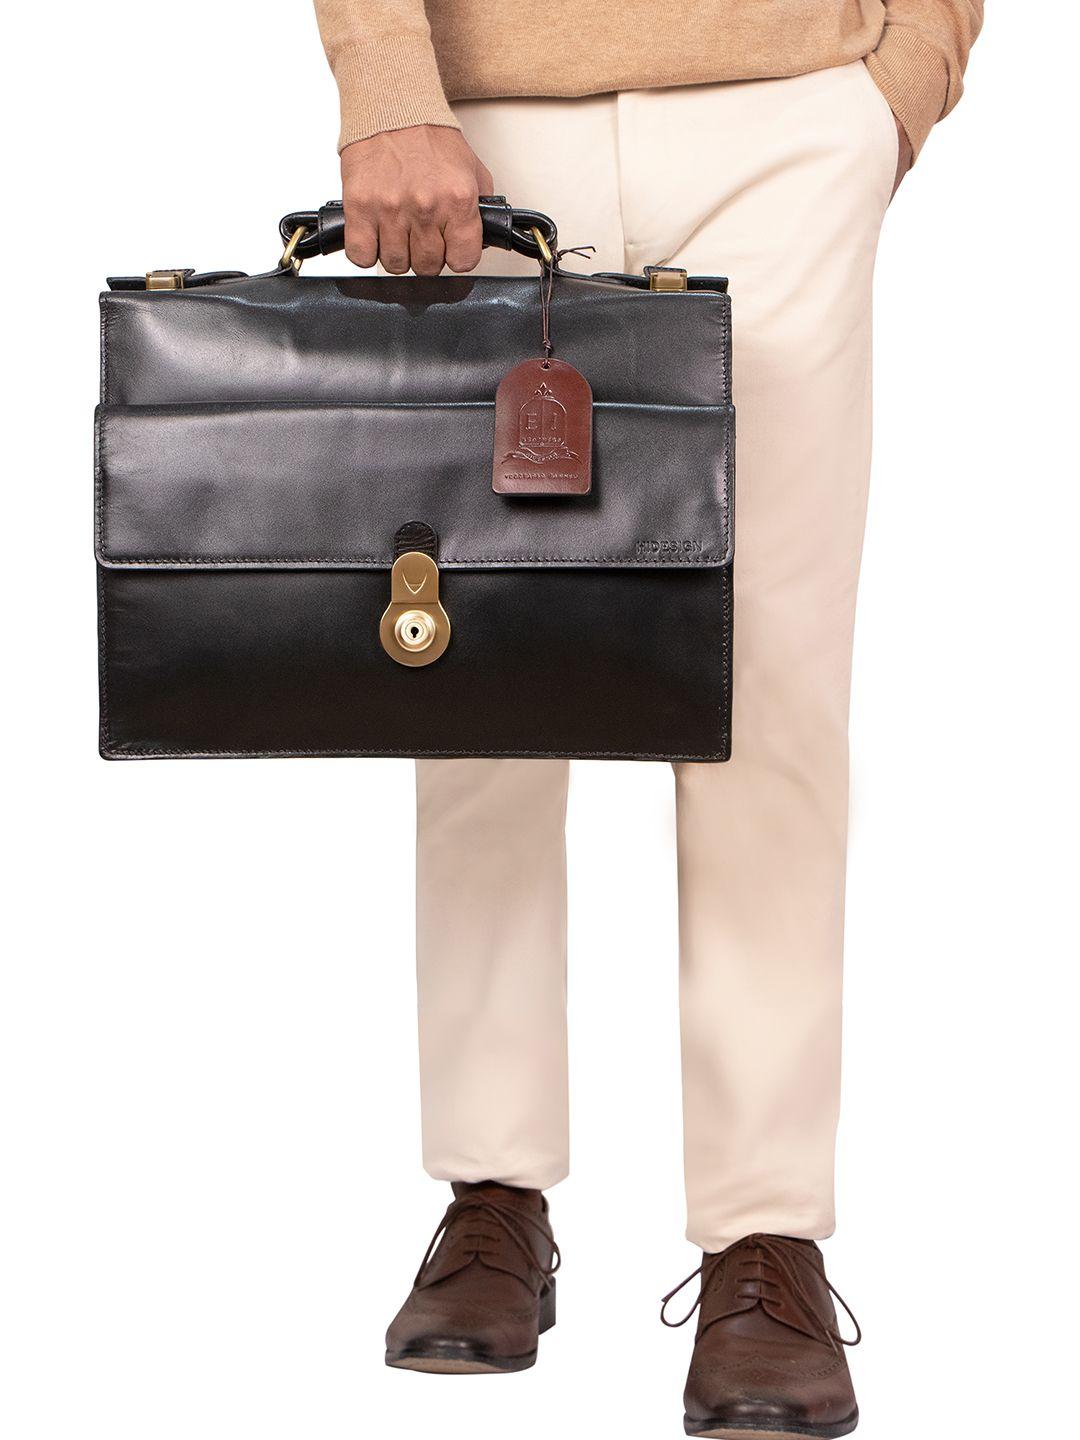 hidesign men leather laptop bag up to 15 inch